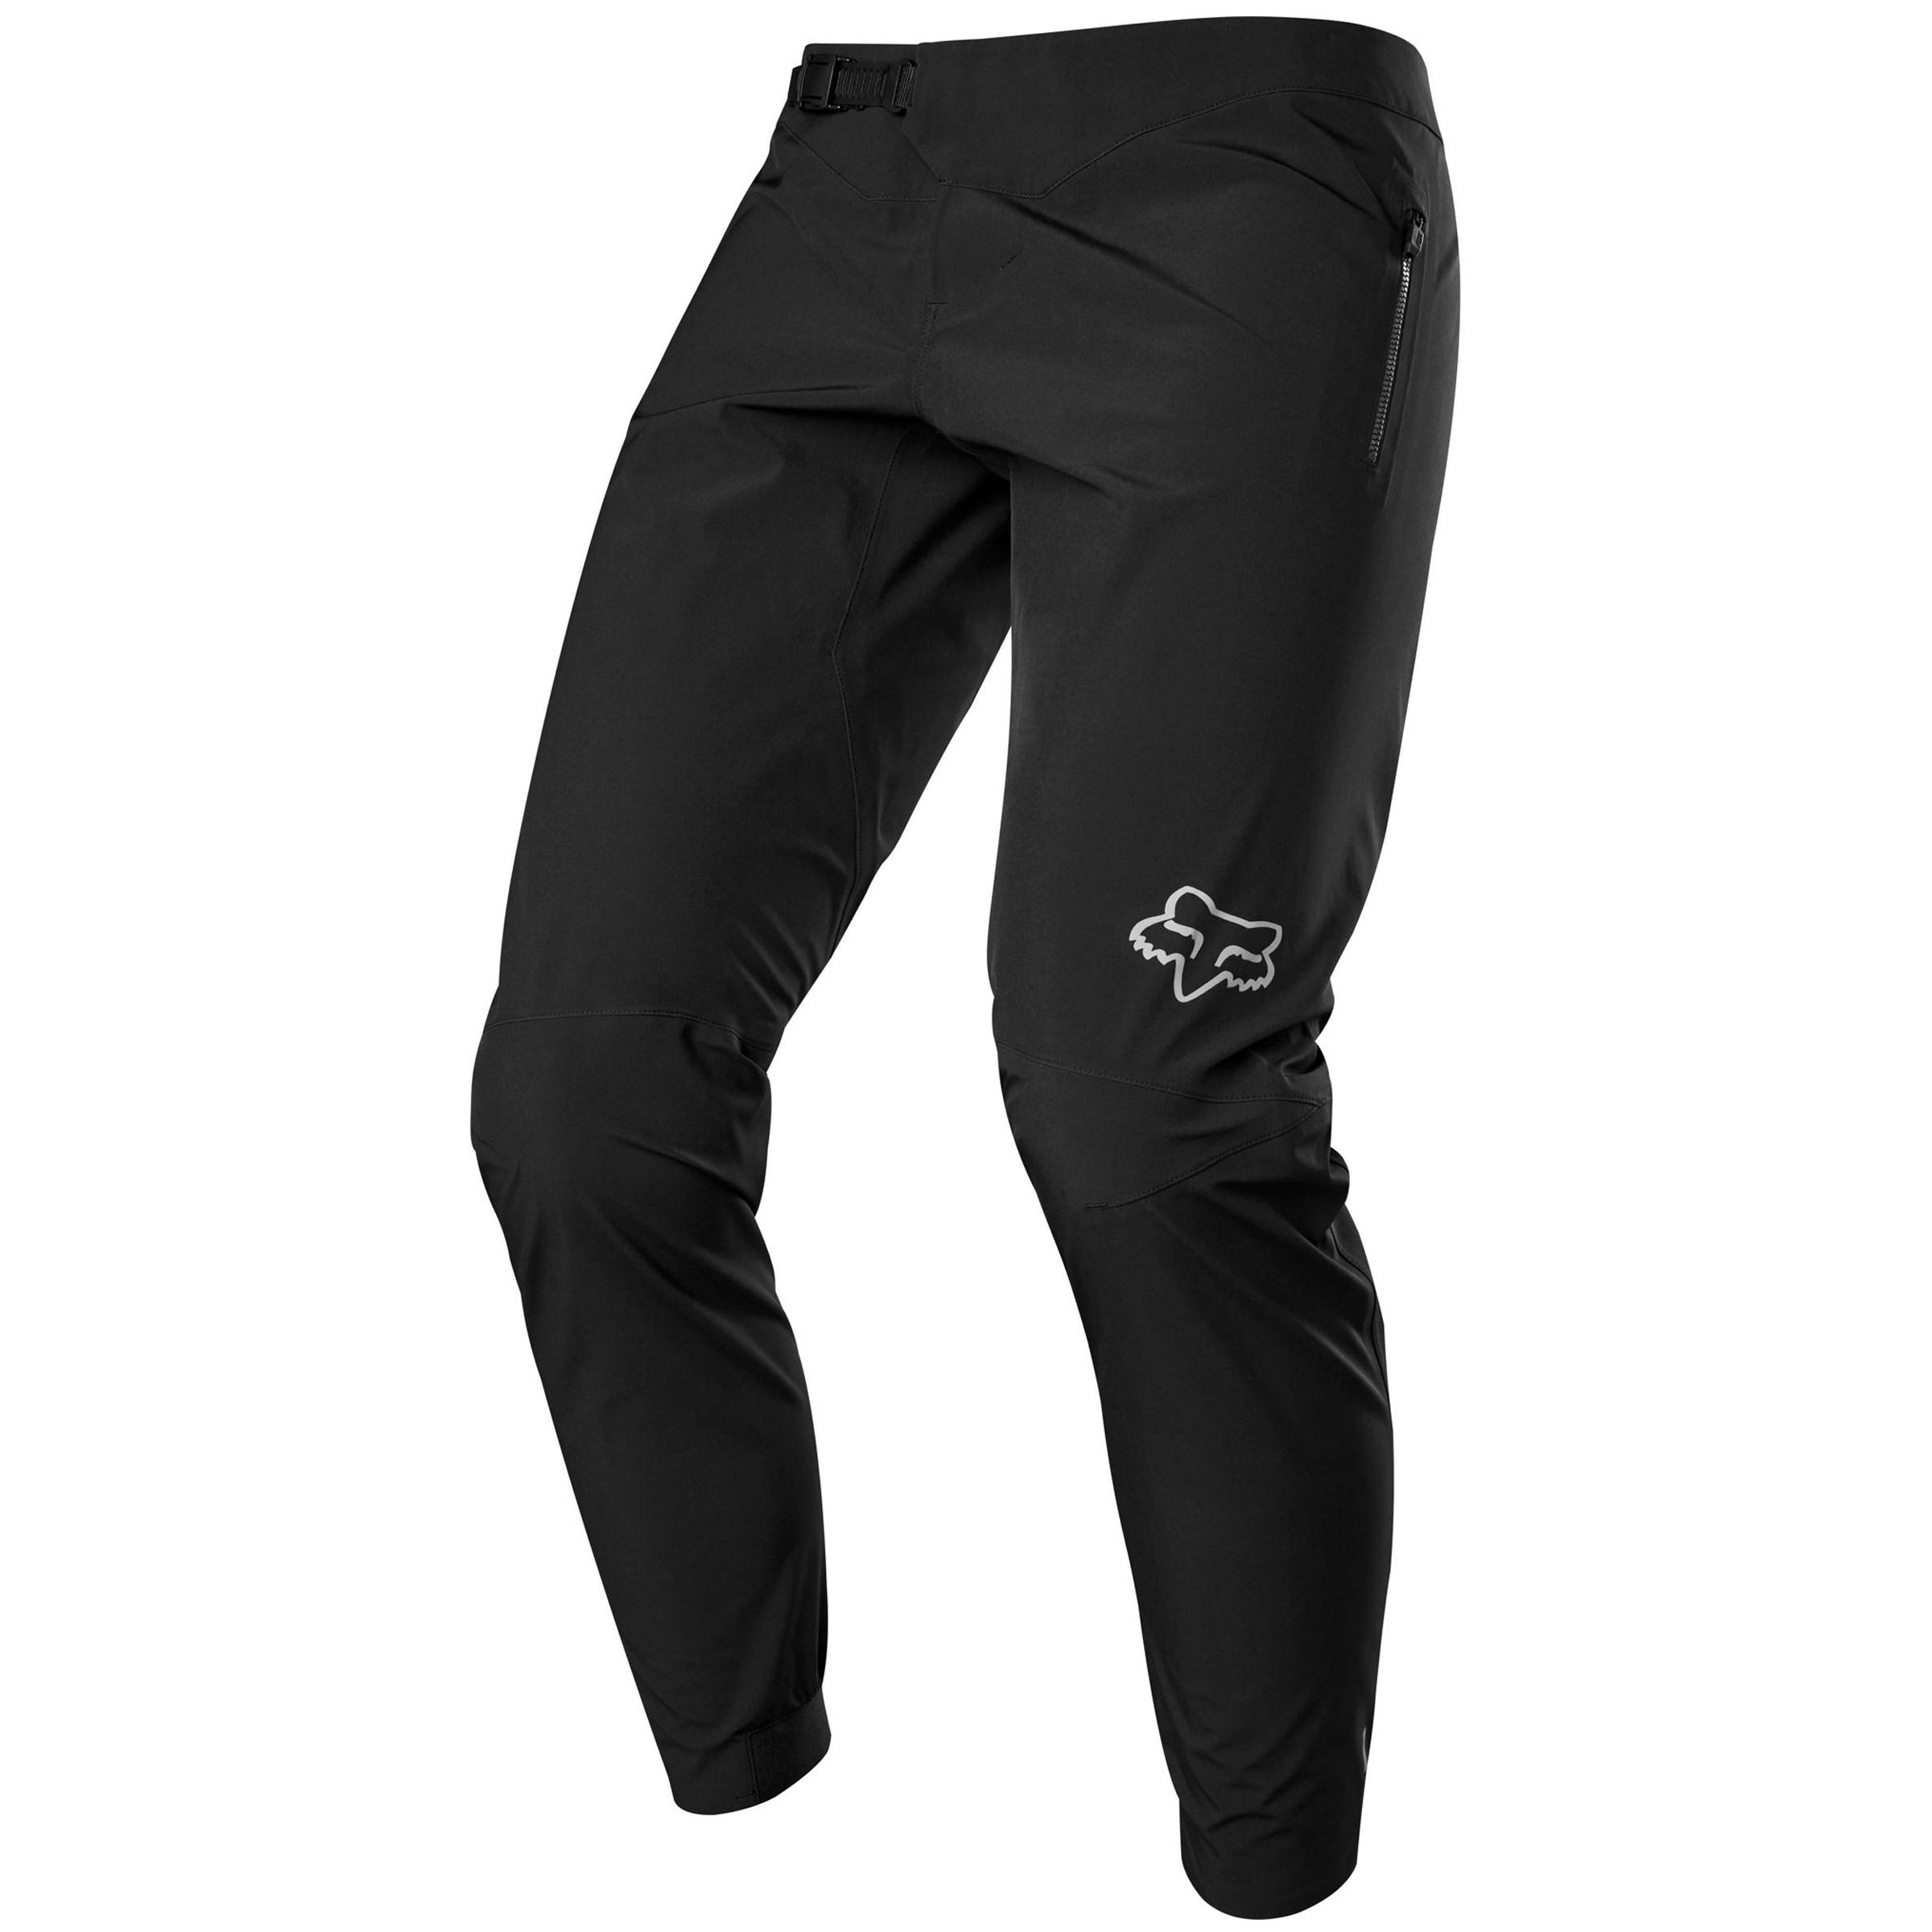 Leatt Finally Long Impact Trousers - Protective Trousers Unisex Unisex_Adult The 3df 6.0 Offers You top of The Range Protection 